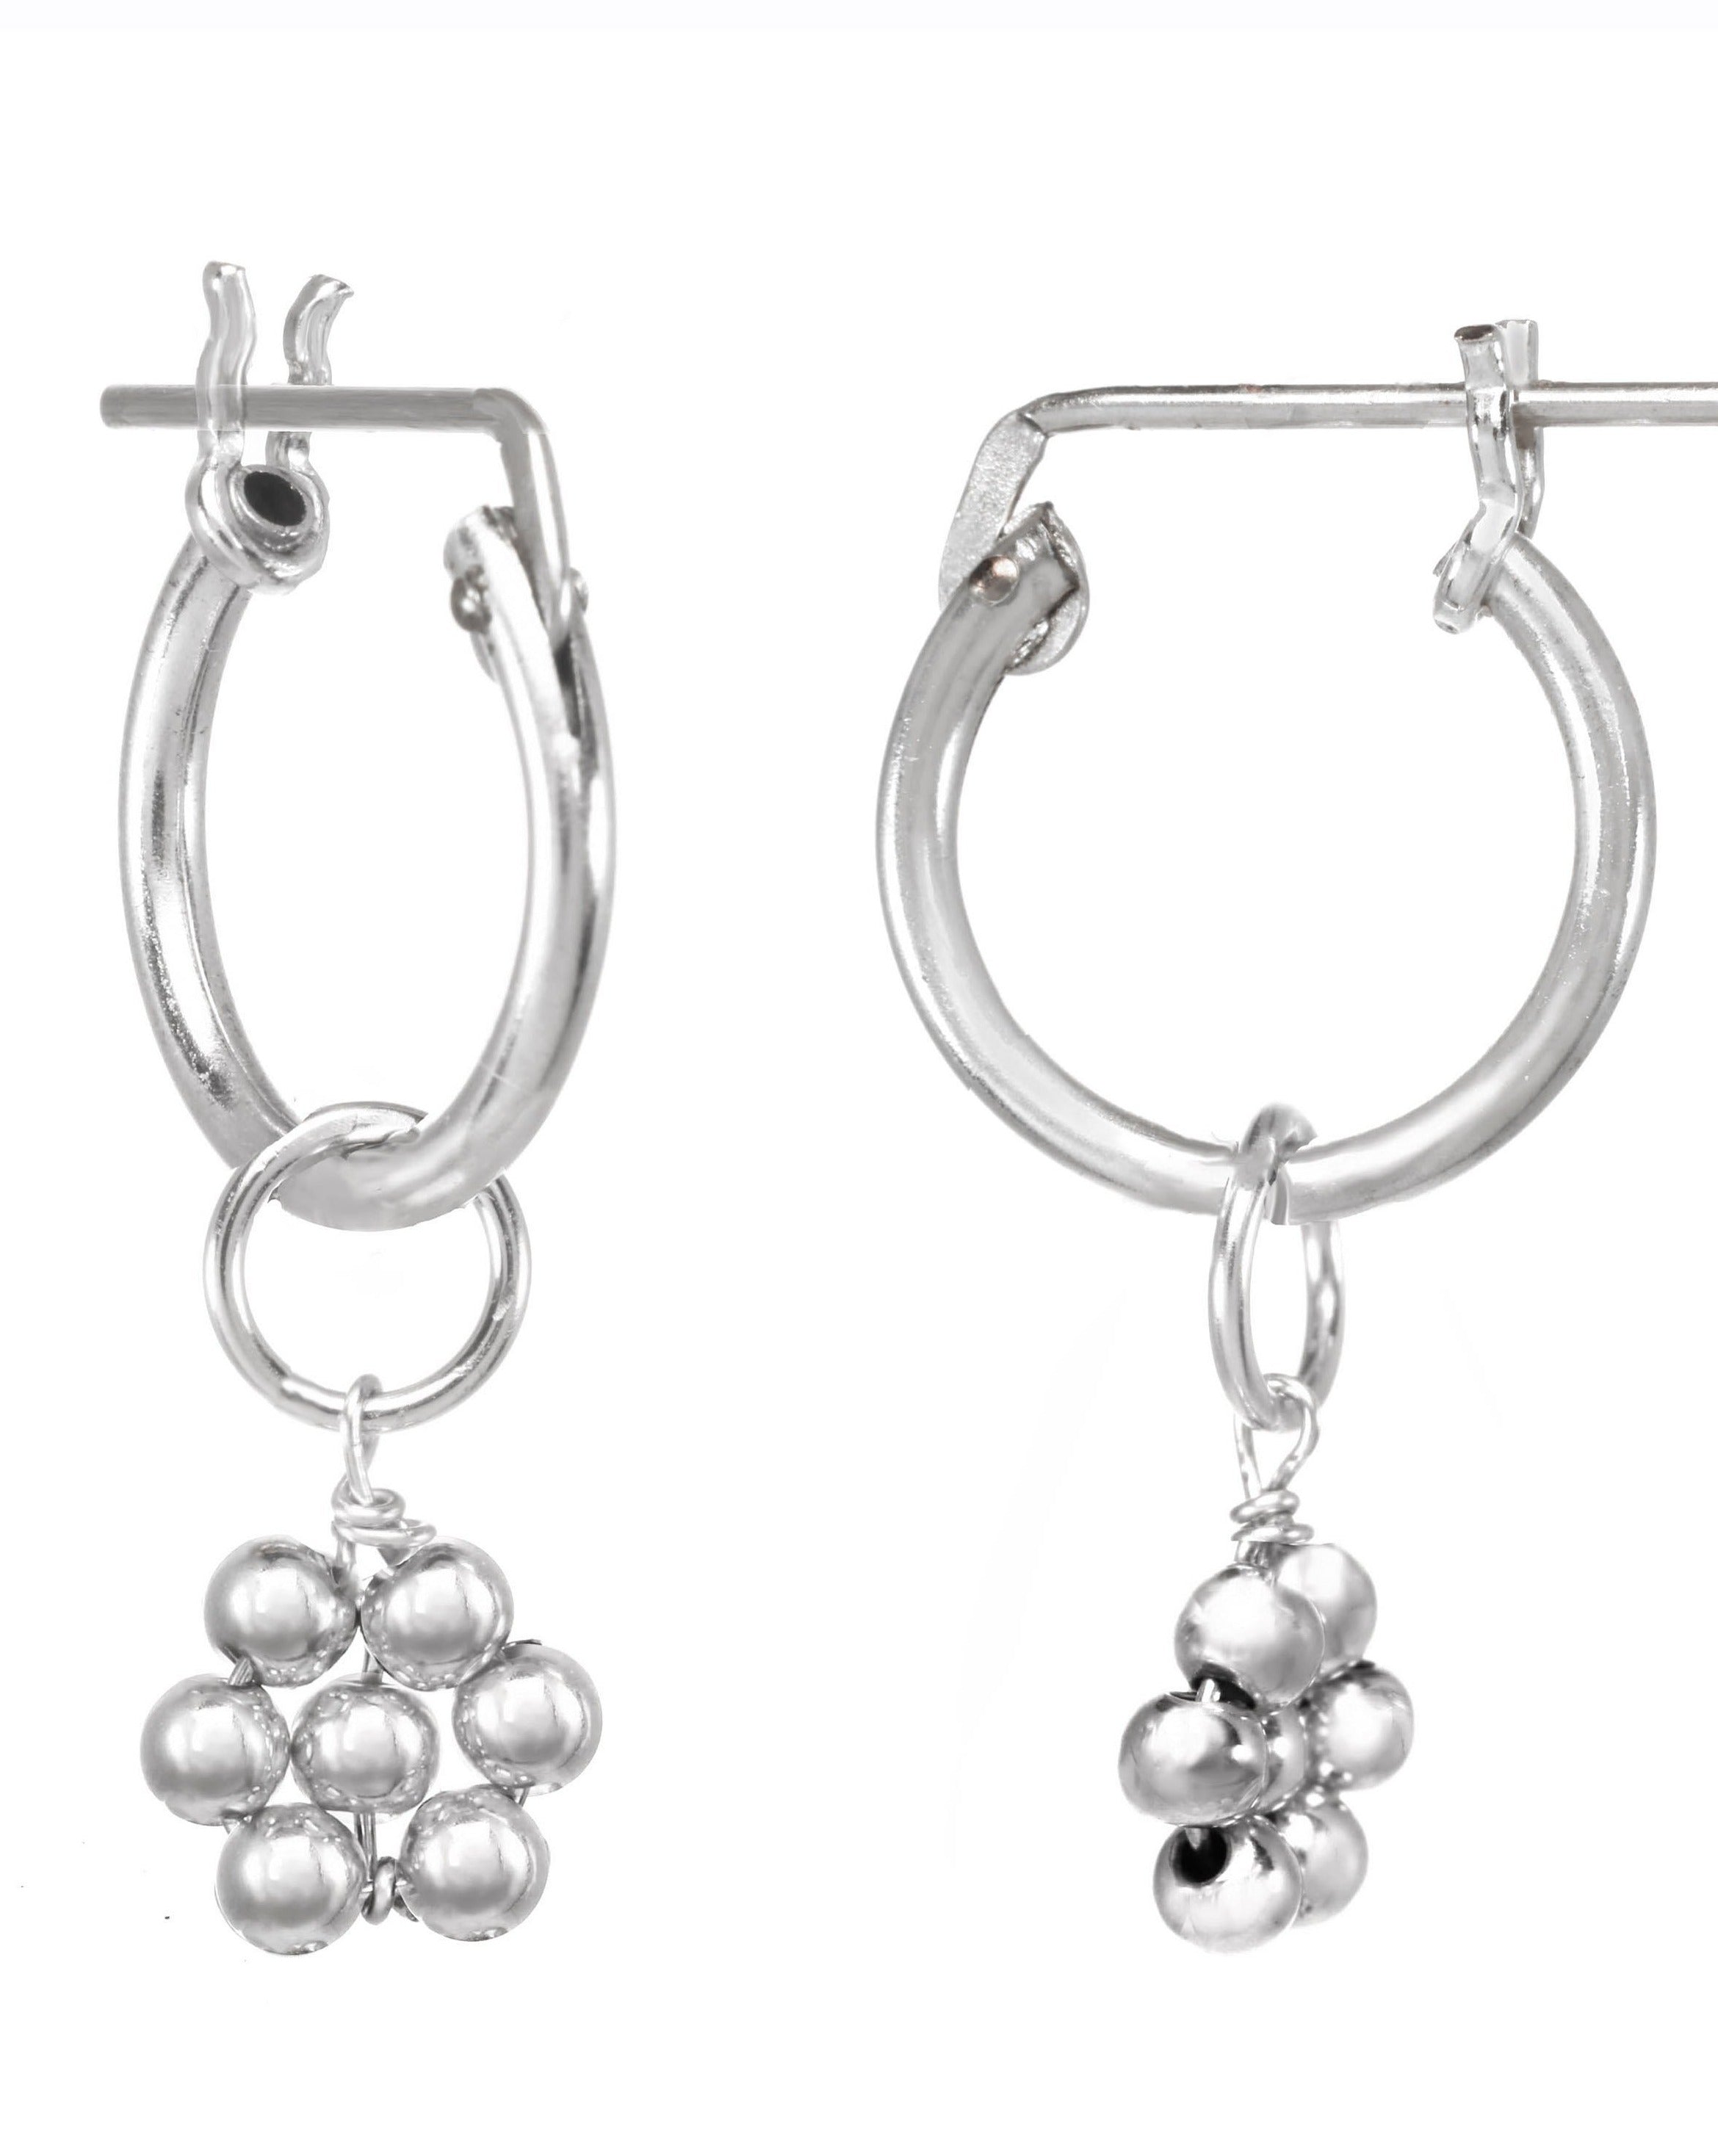 Rosalee Earrings by KOZAKH. 12mm snap closure hoop earrings, crafted in Sterling Silver, featuring dangling handmade beaded daisy charms.